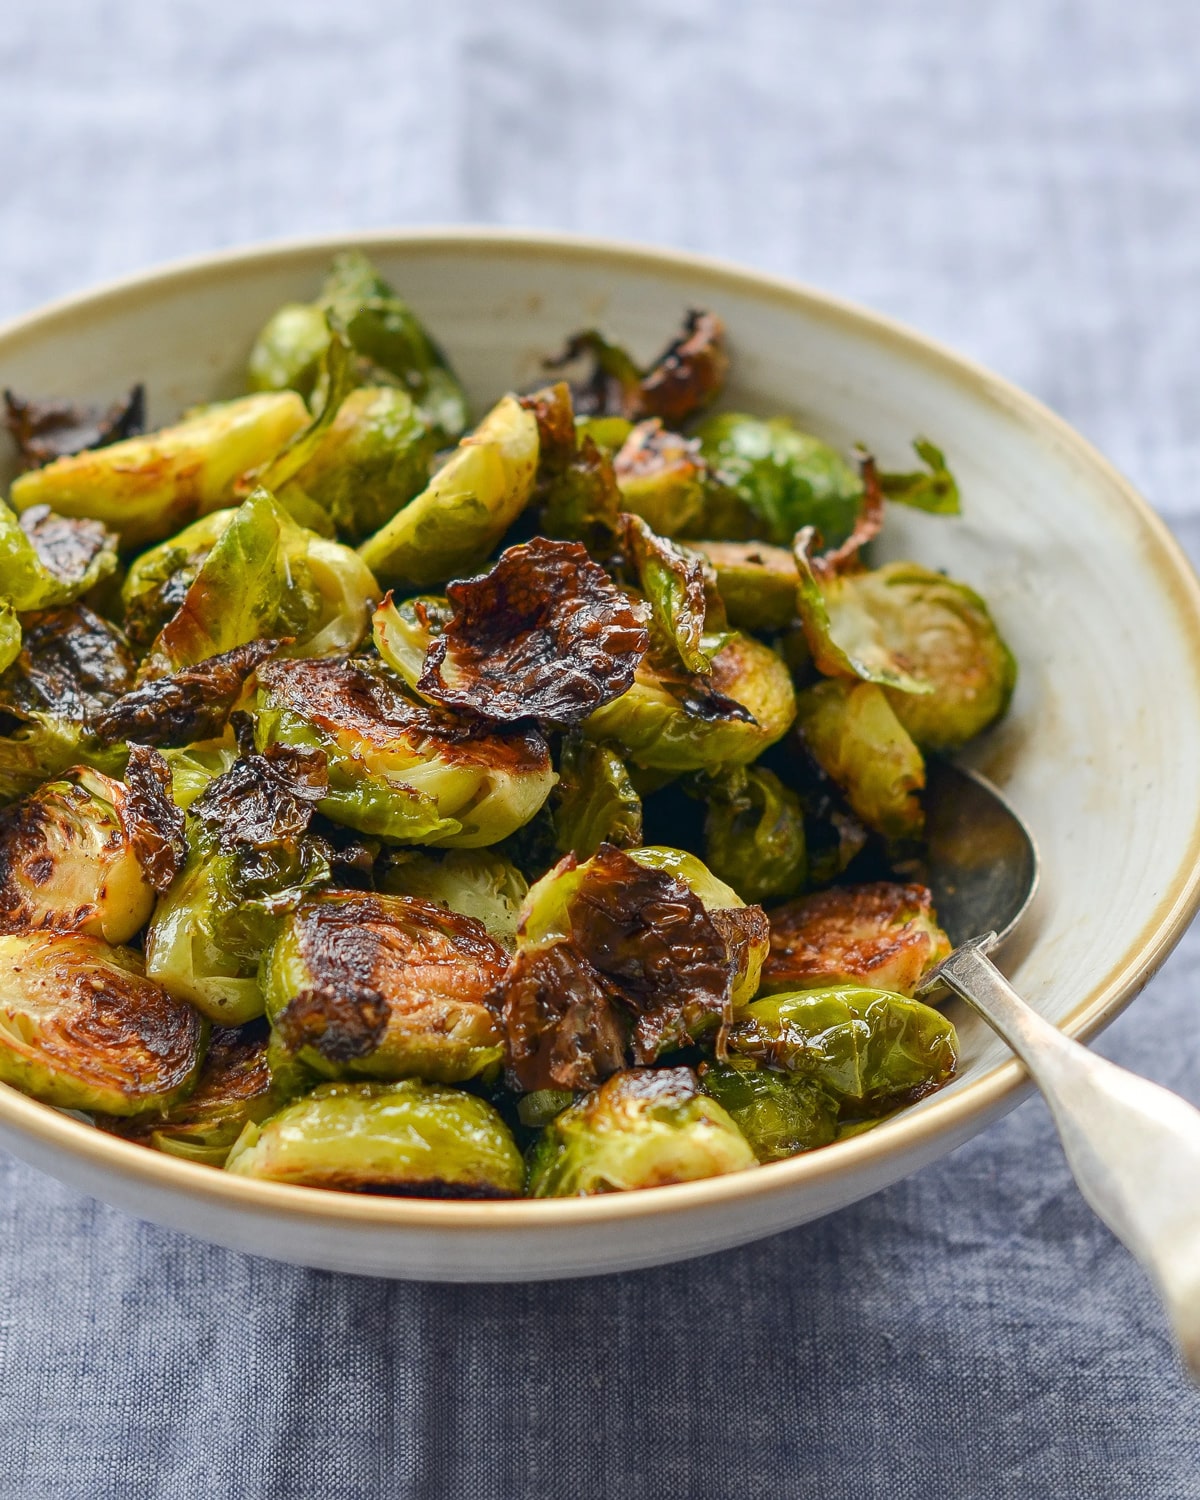 Roasted brussels sprouts with balsamic vinegar and honey